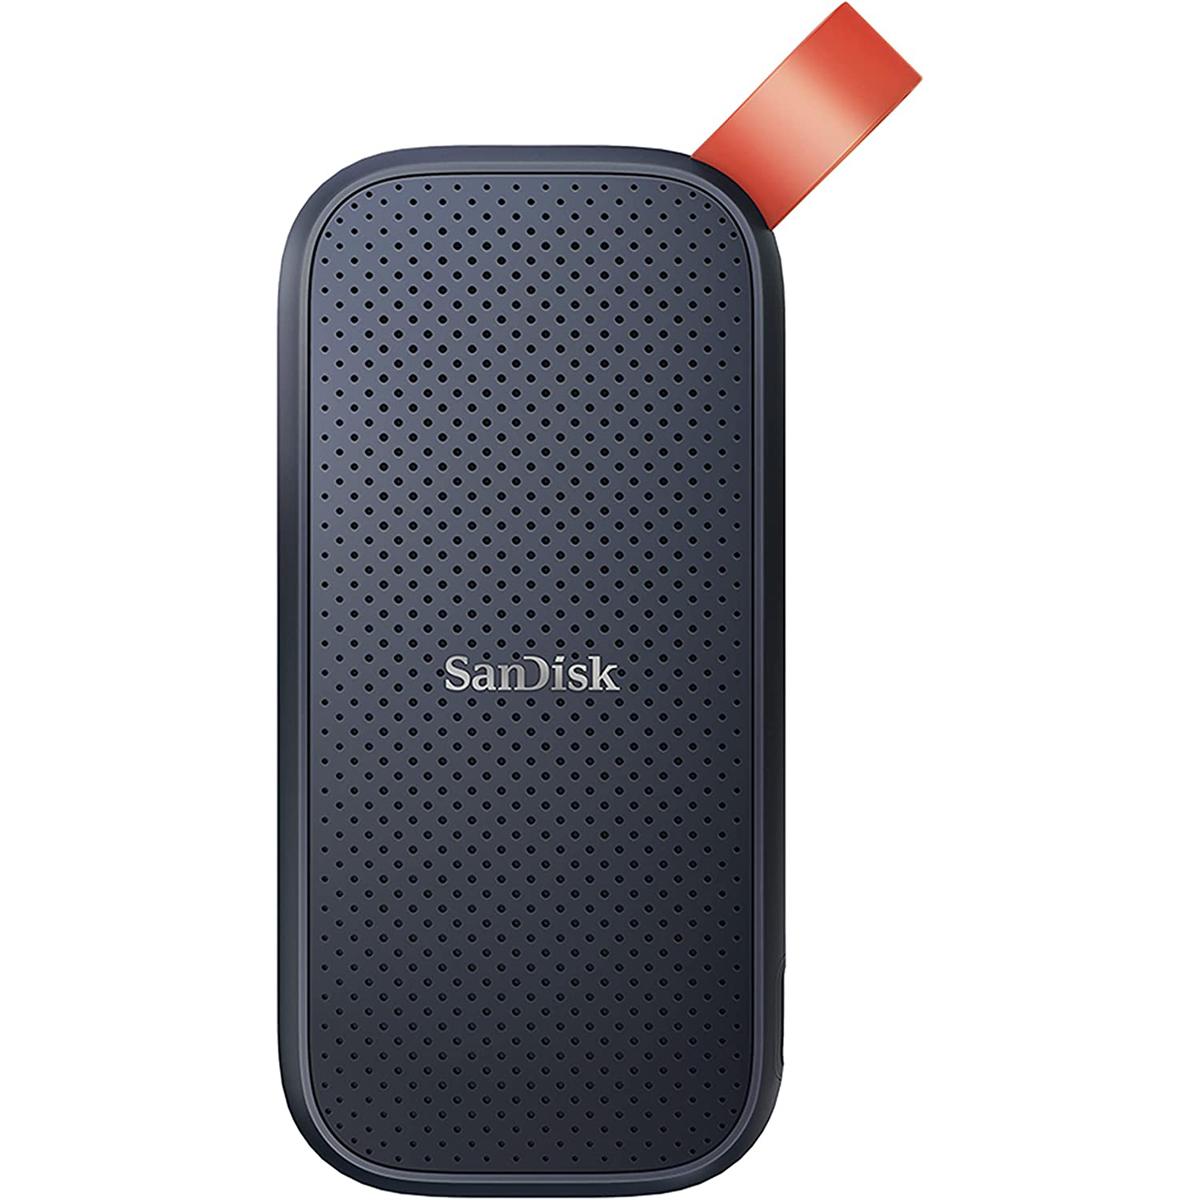 SanDisk 1TB Portable SSD USB-C Portable Solid State Drive for $62.99 Shipped